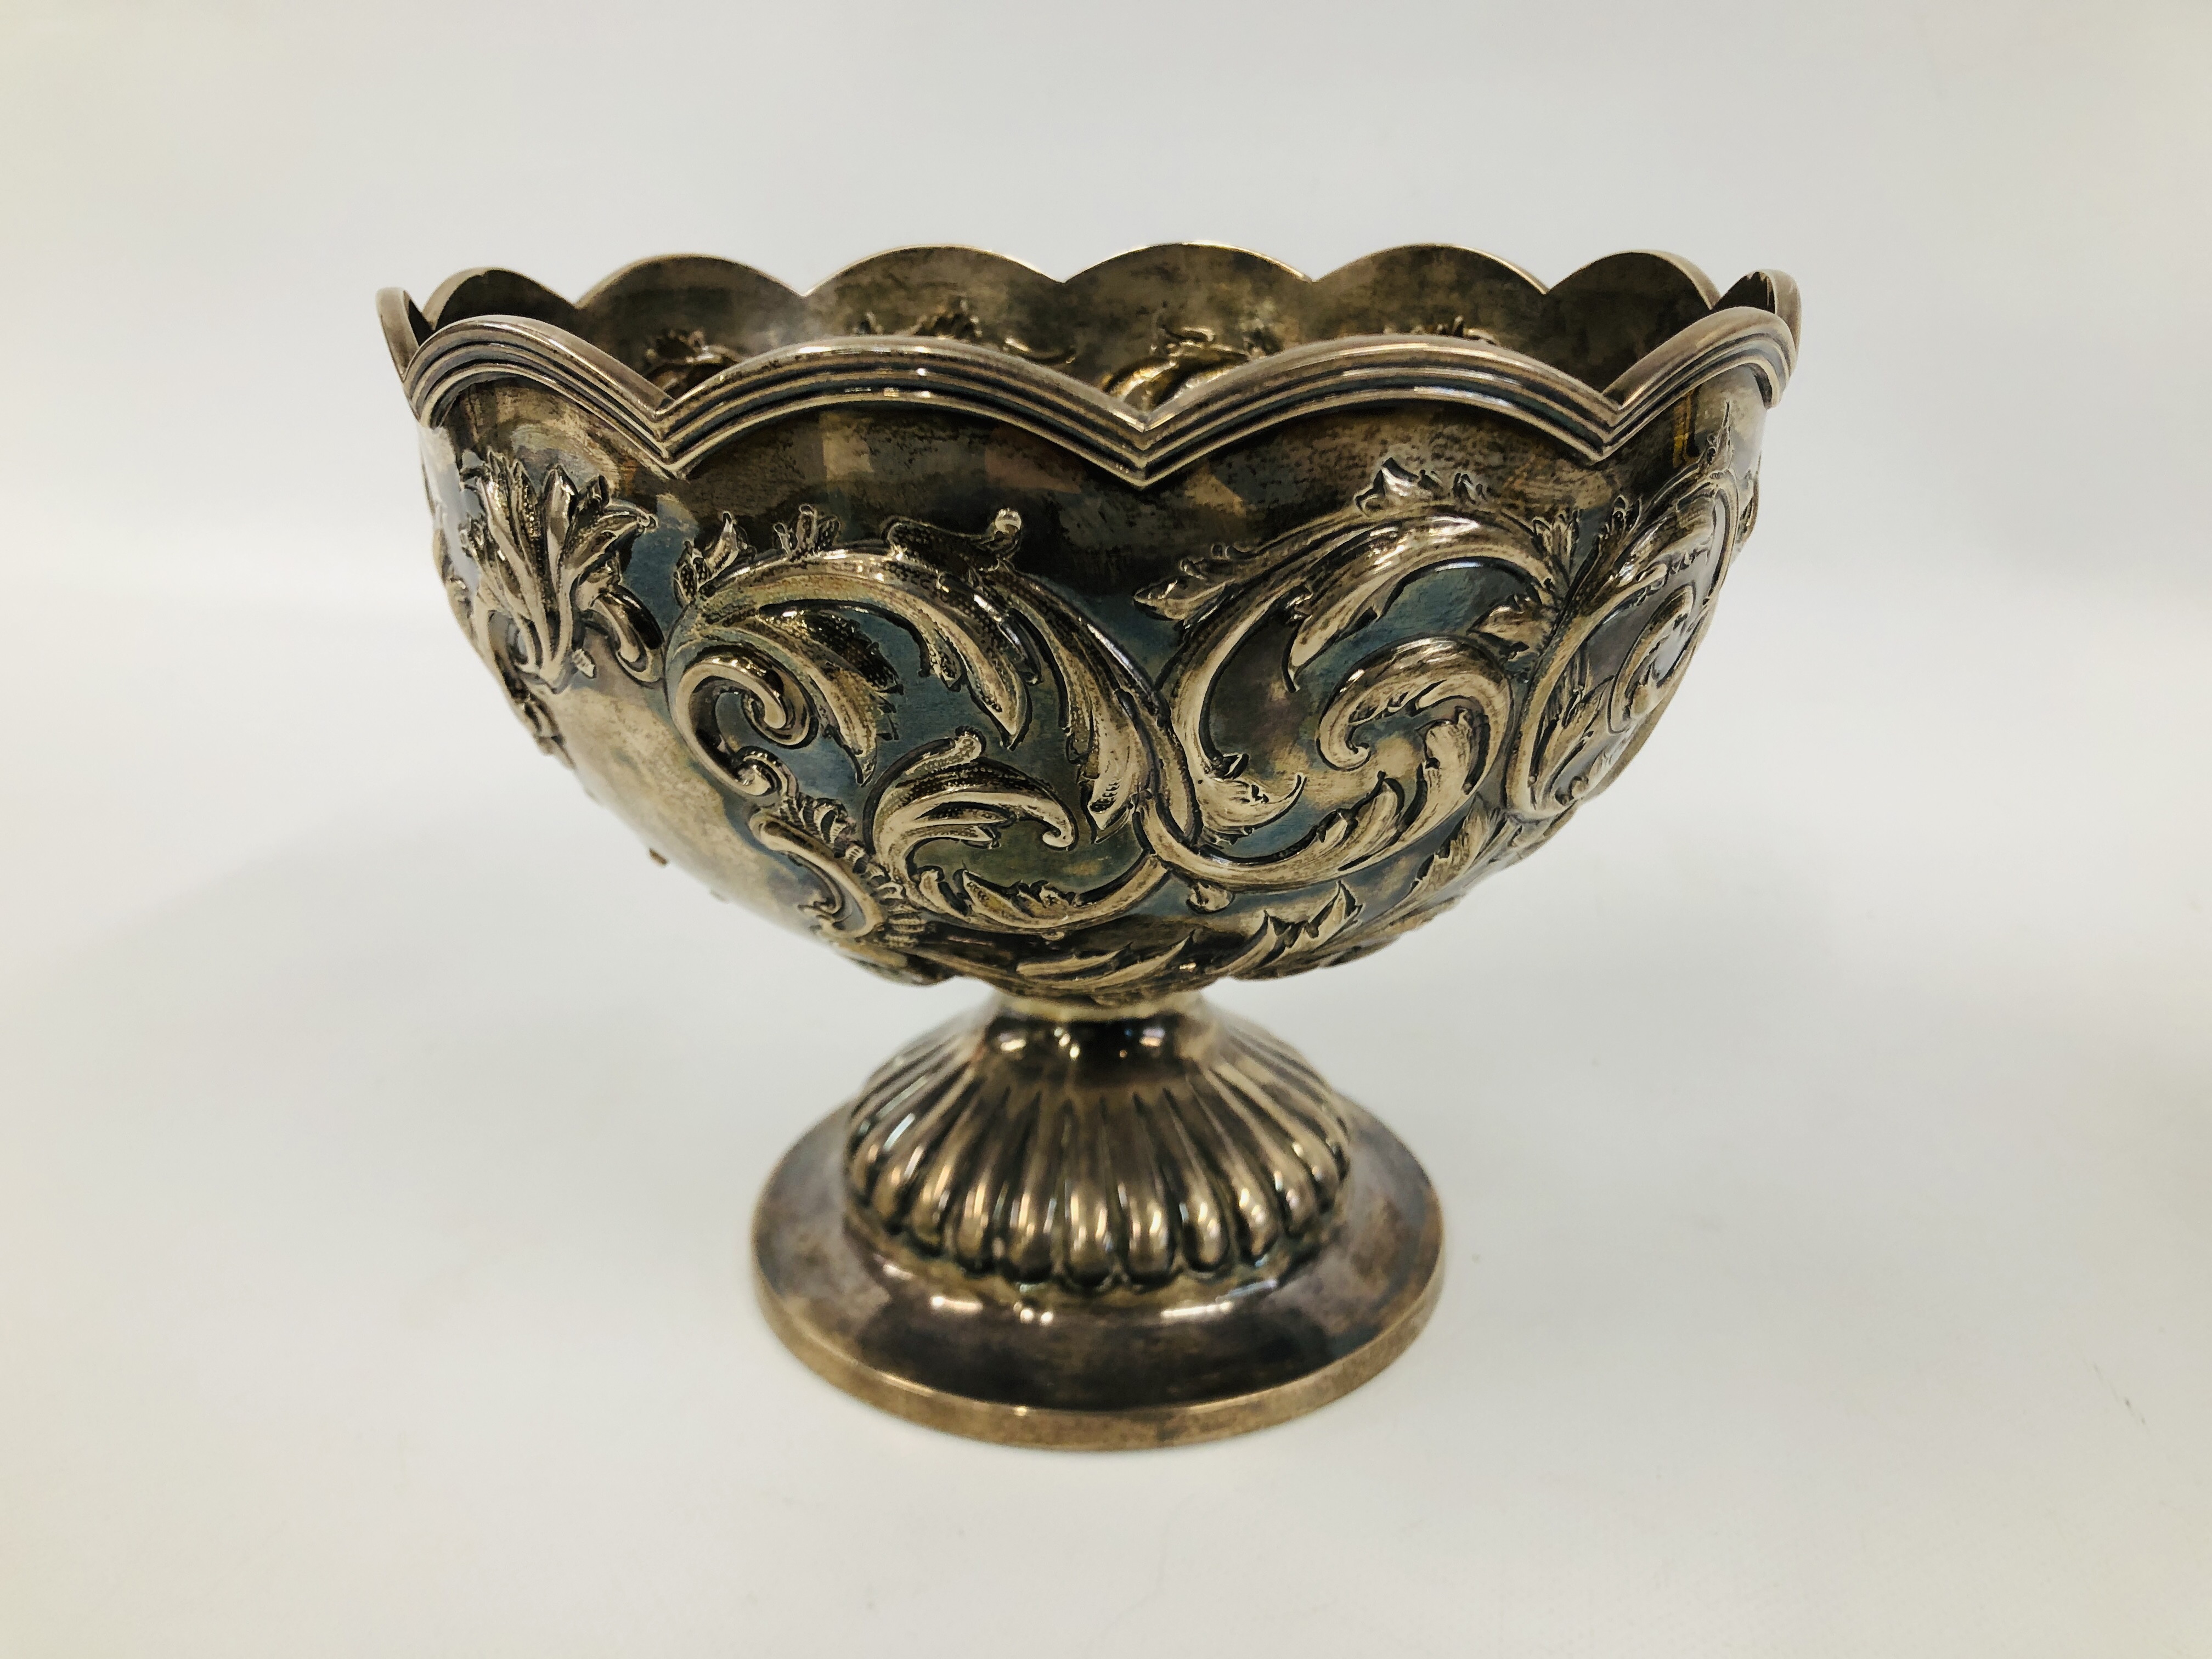 A VICTORIAN SILVER FOOTED ROSE BOWL THE WAVY RIM ABOVE SCROLLED LEAF DECORATION, - Image 8 of 11